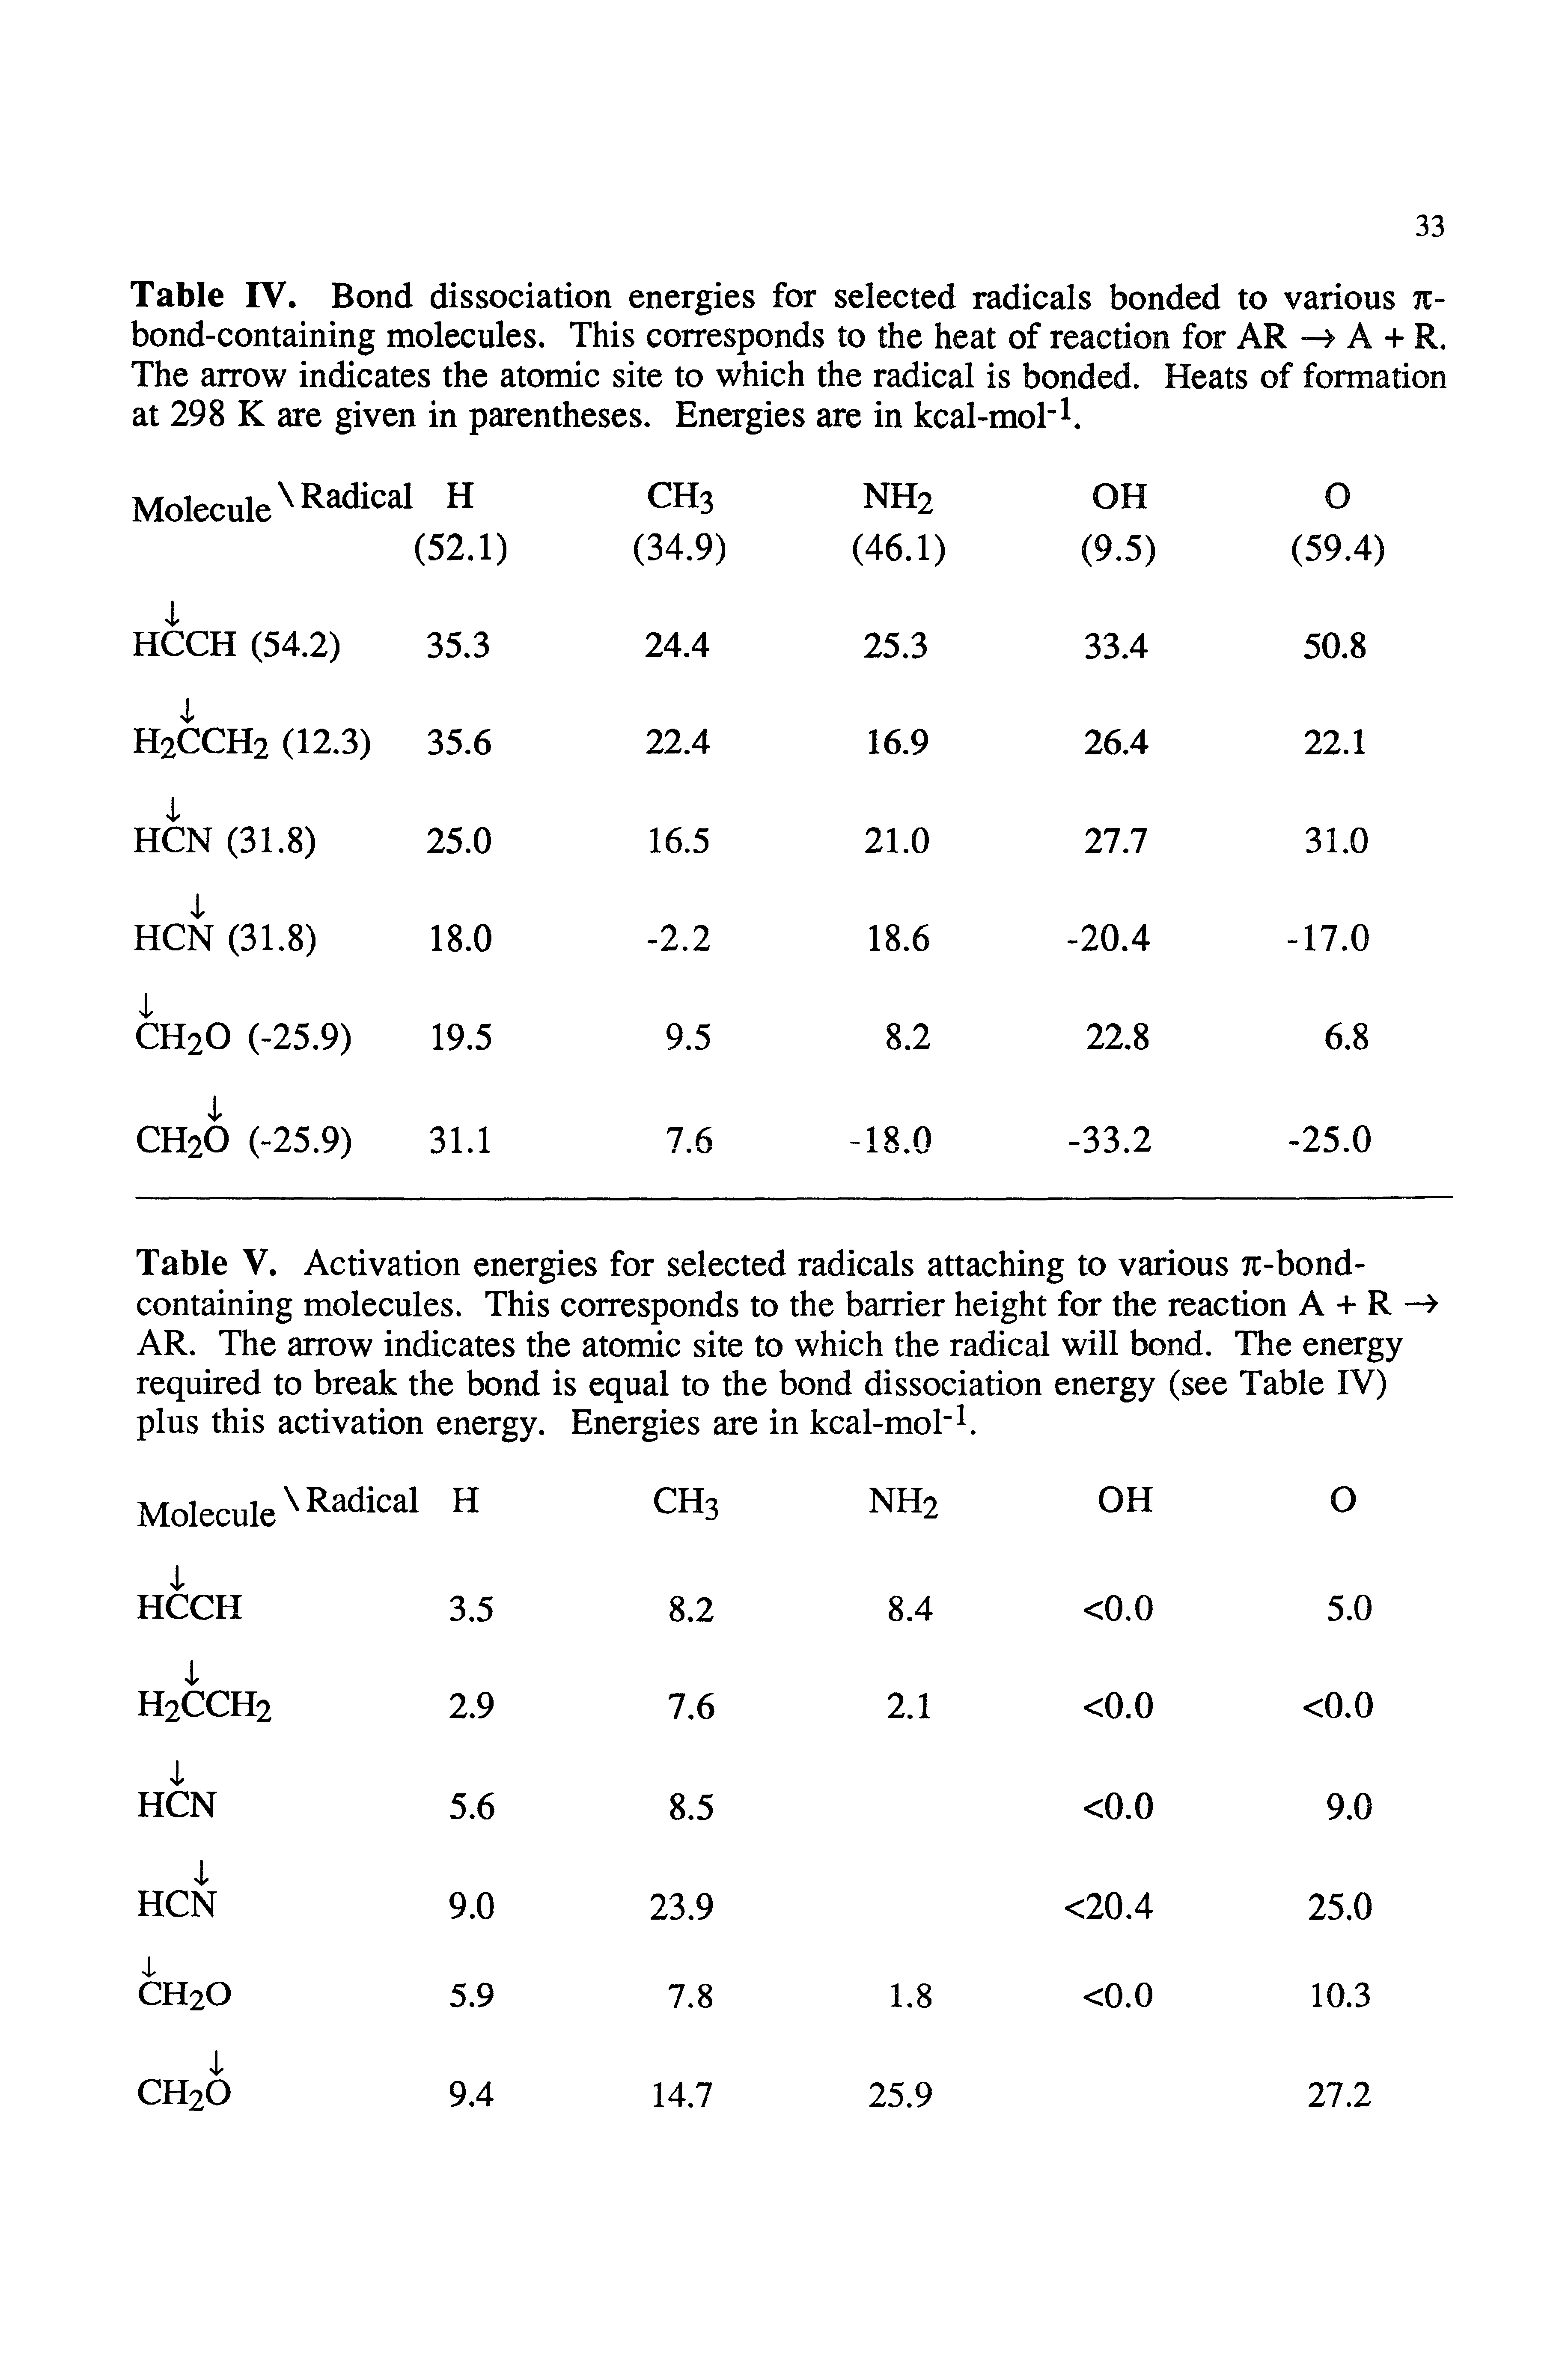 Table V. Activation energies for selected radicals attaching to various 7t-bond-containing molecules. This corresponds to the barrier height for the reaction A + R AR. The arrow indicates the atomic site to which the radical will bond. The energy required to break the bond is equal to the bond dissociation energy (see Table IV) plus this activation energy. Energies are in kcal-mol"k ...